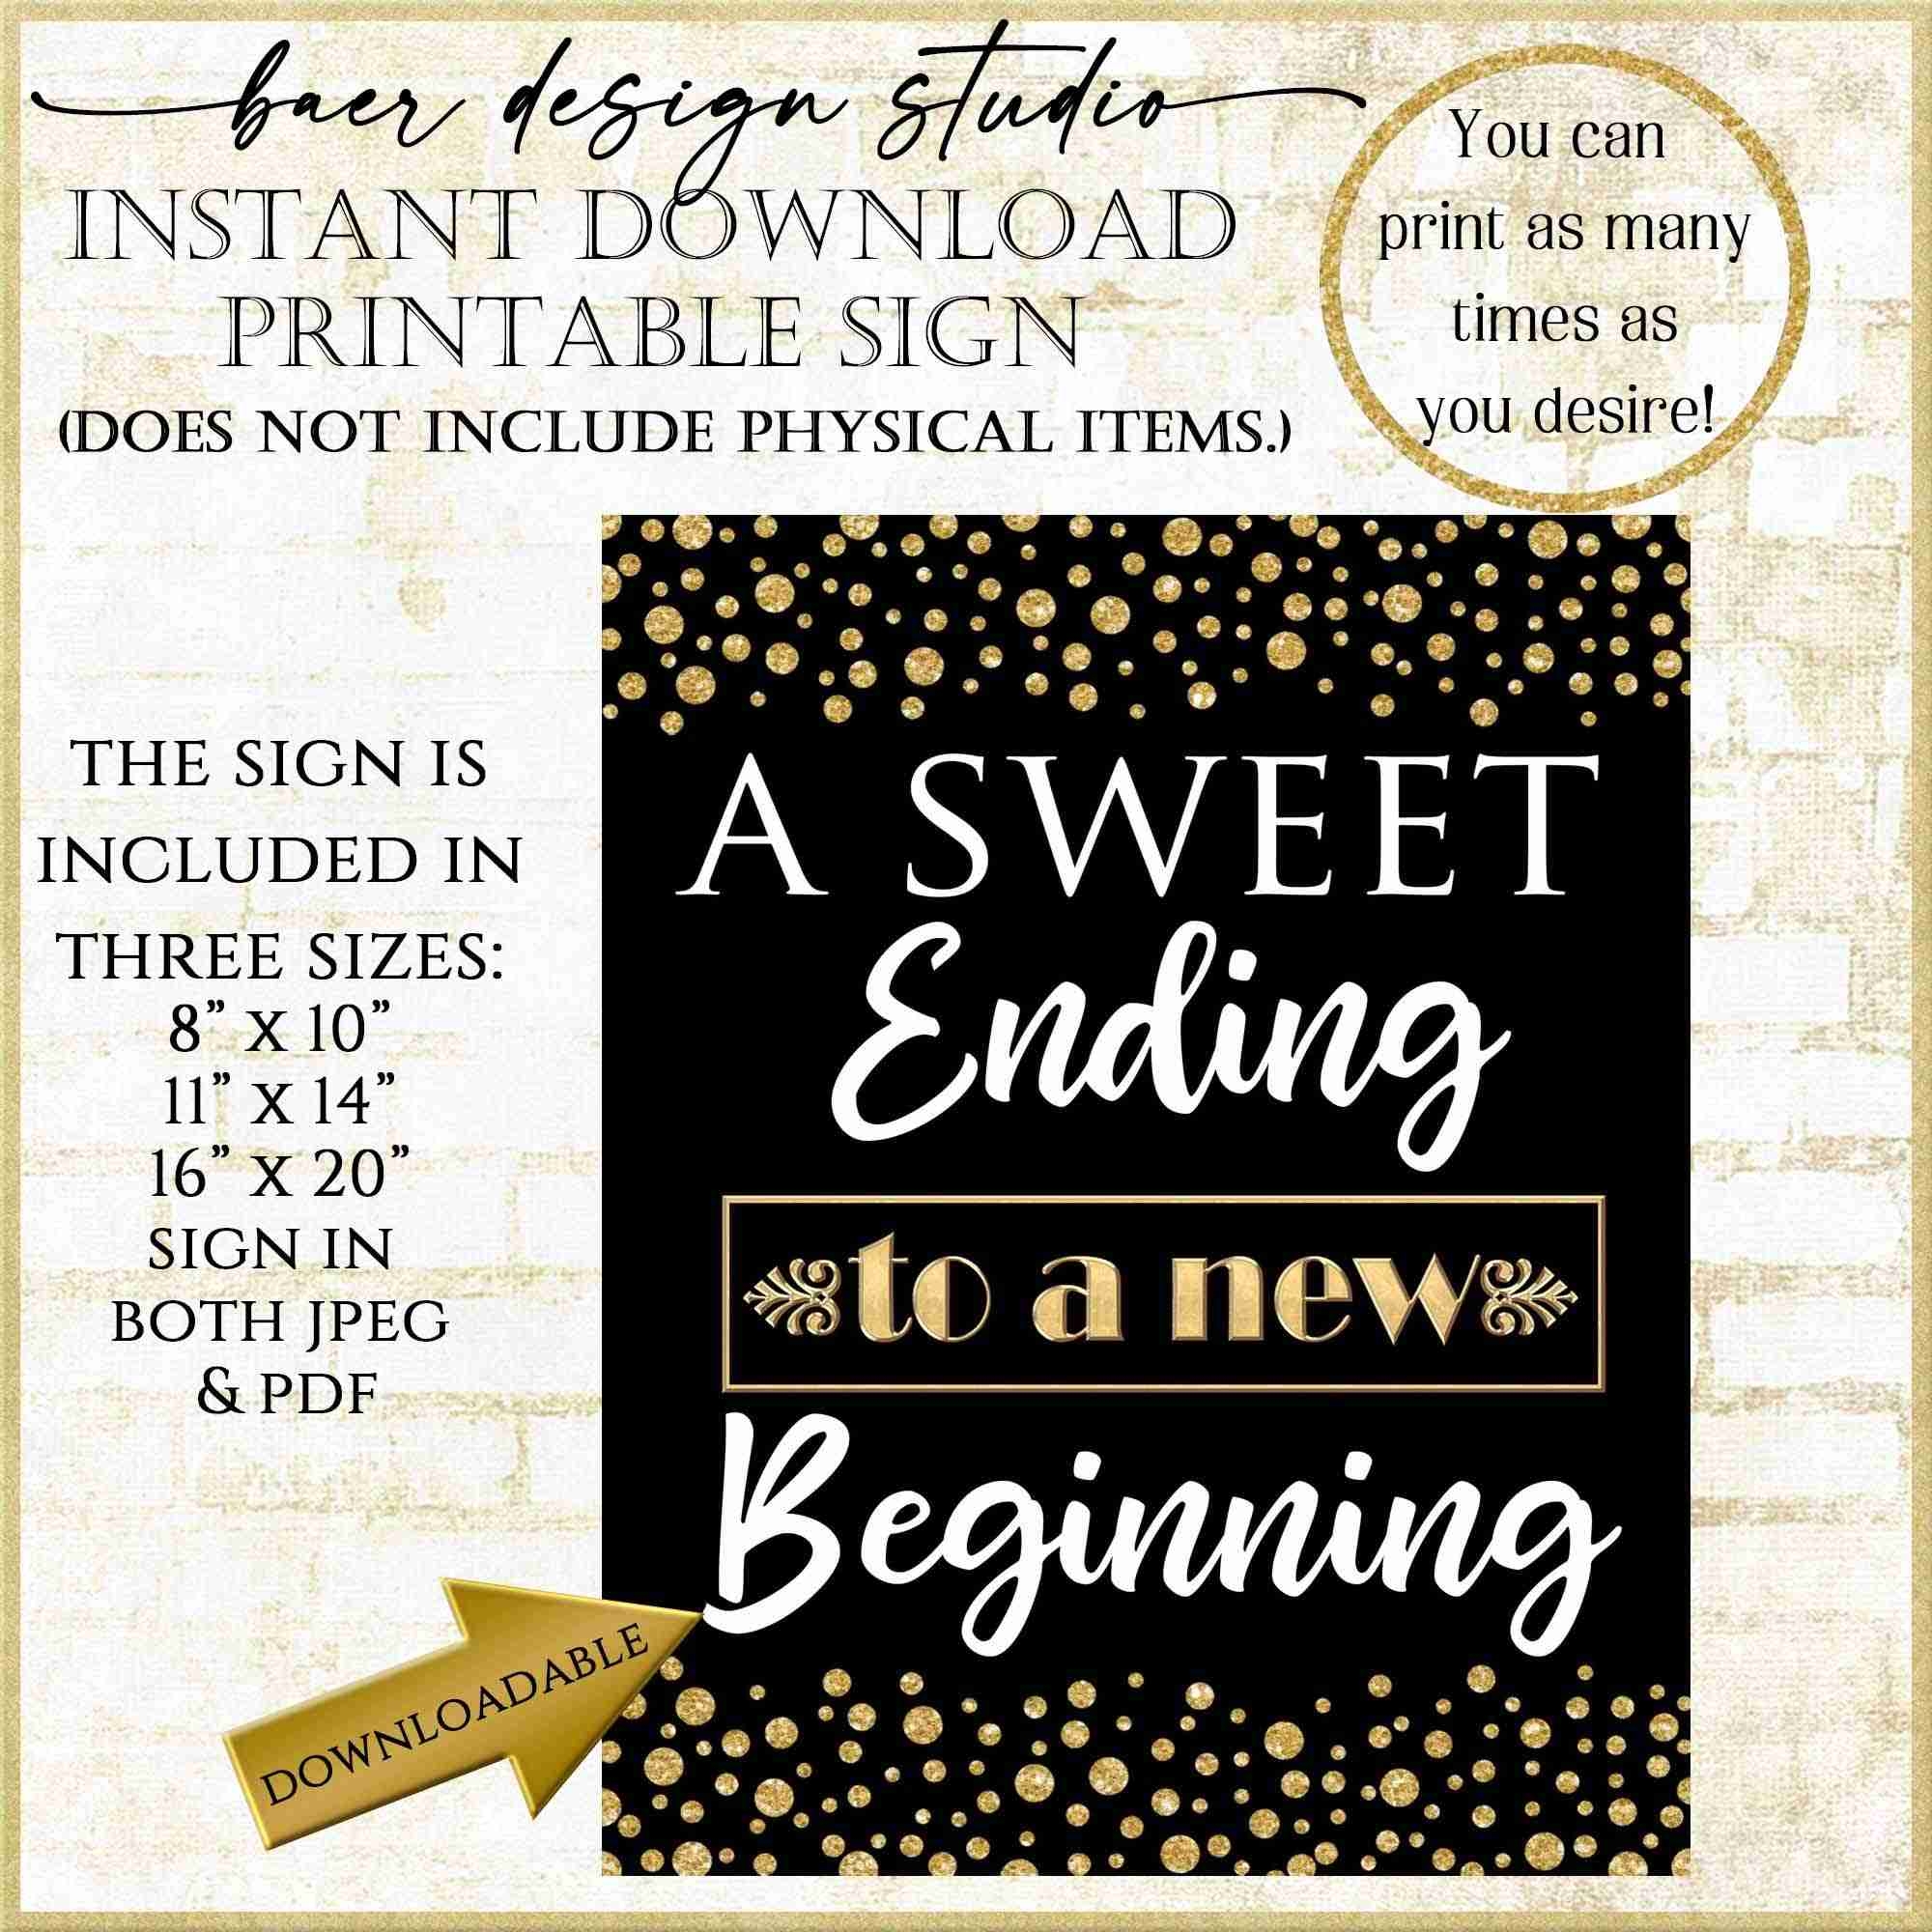 NEW A Sweet Ending Poster To A New Beginning Printable Sign For Parties 92921 Baer Design Studio